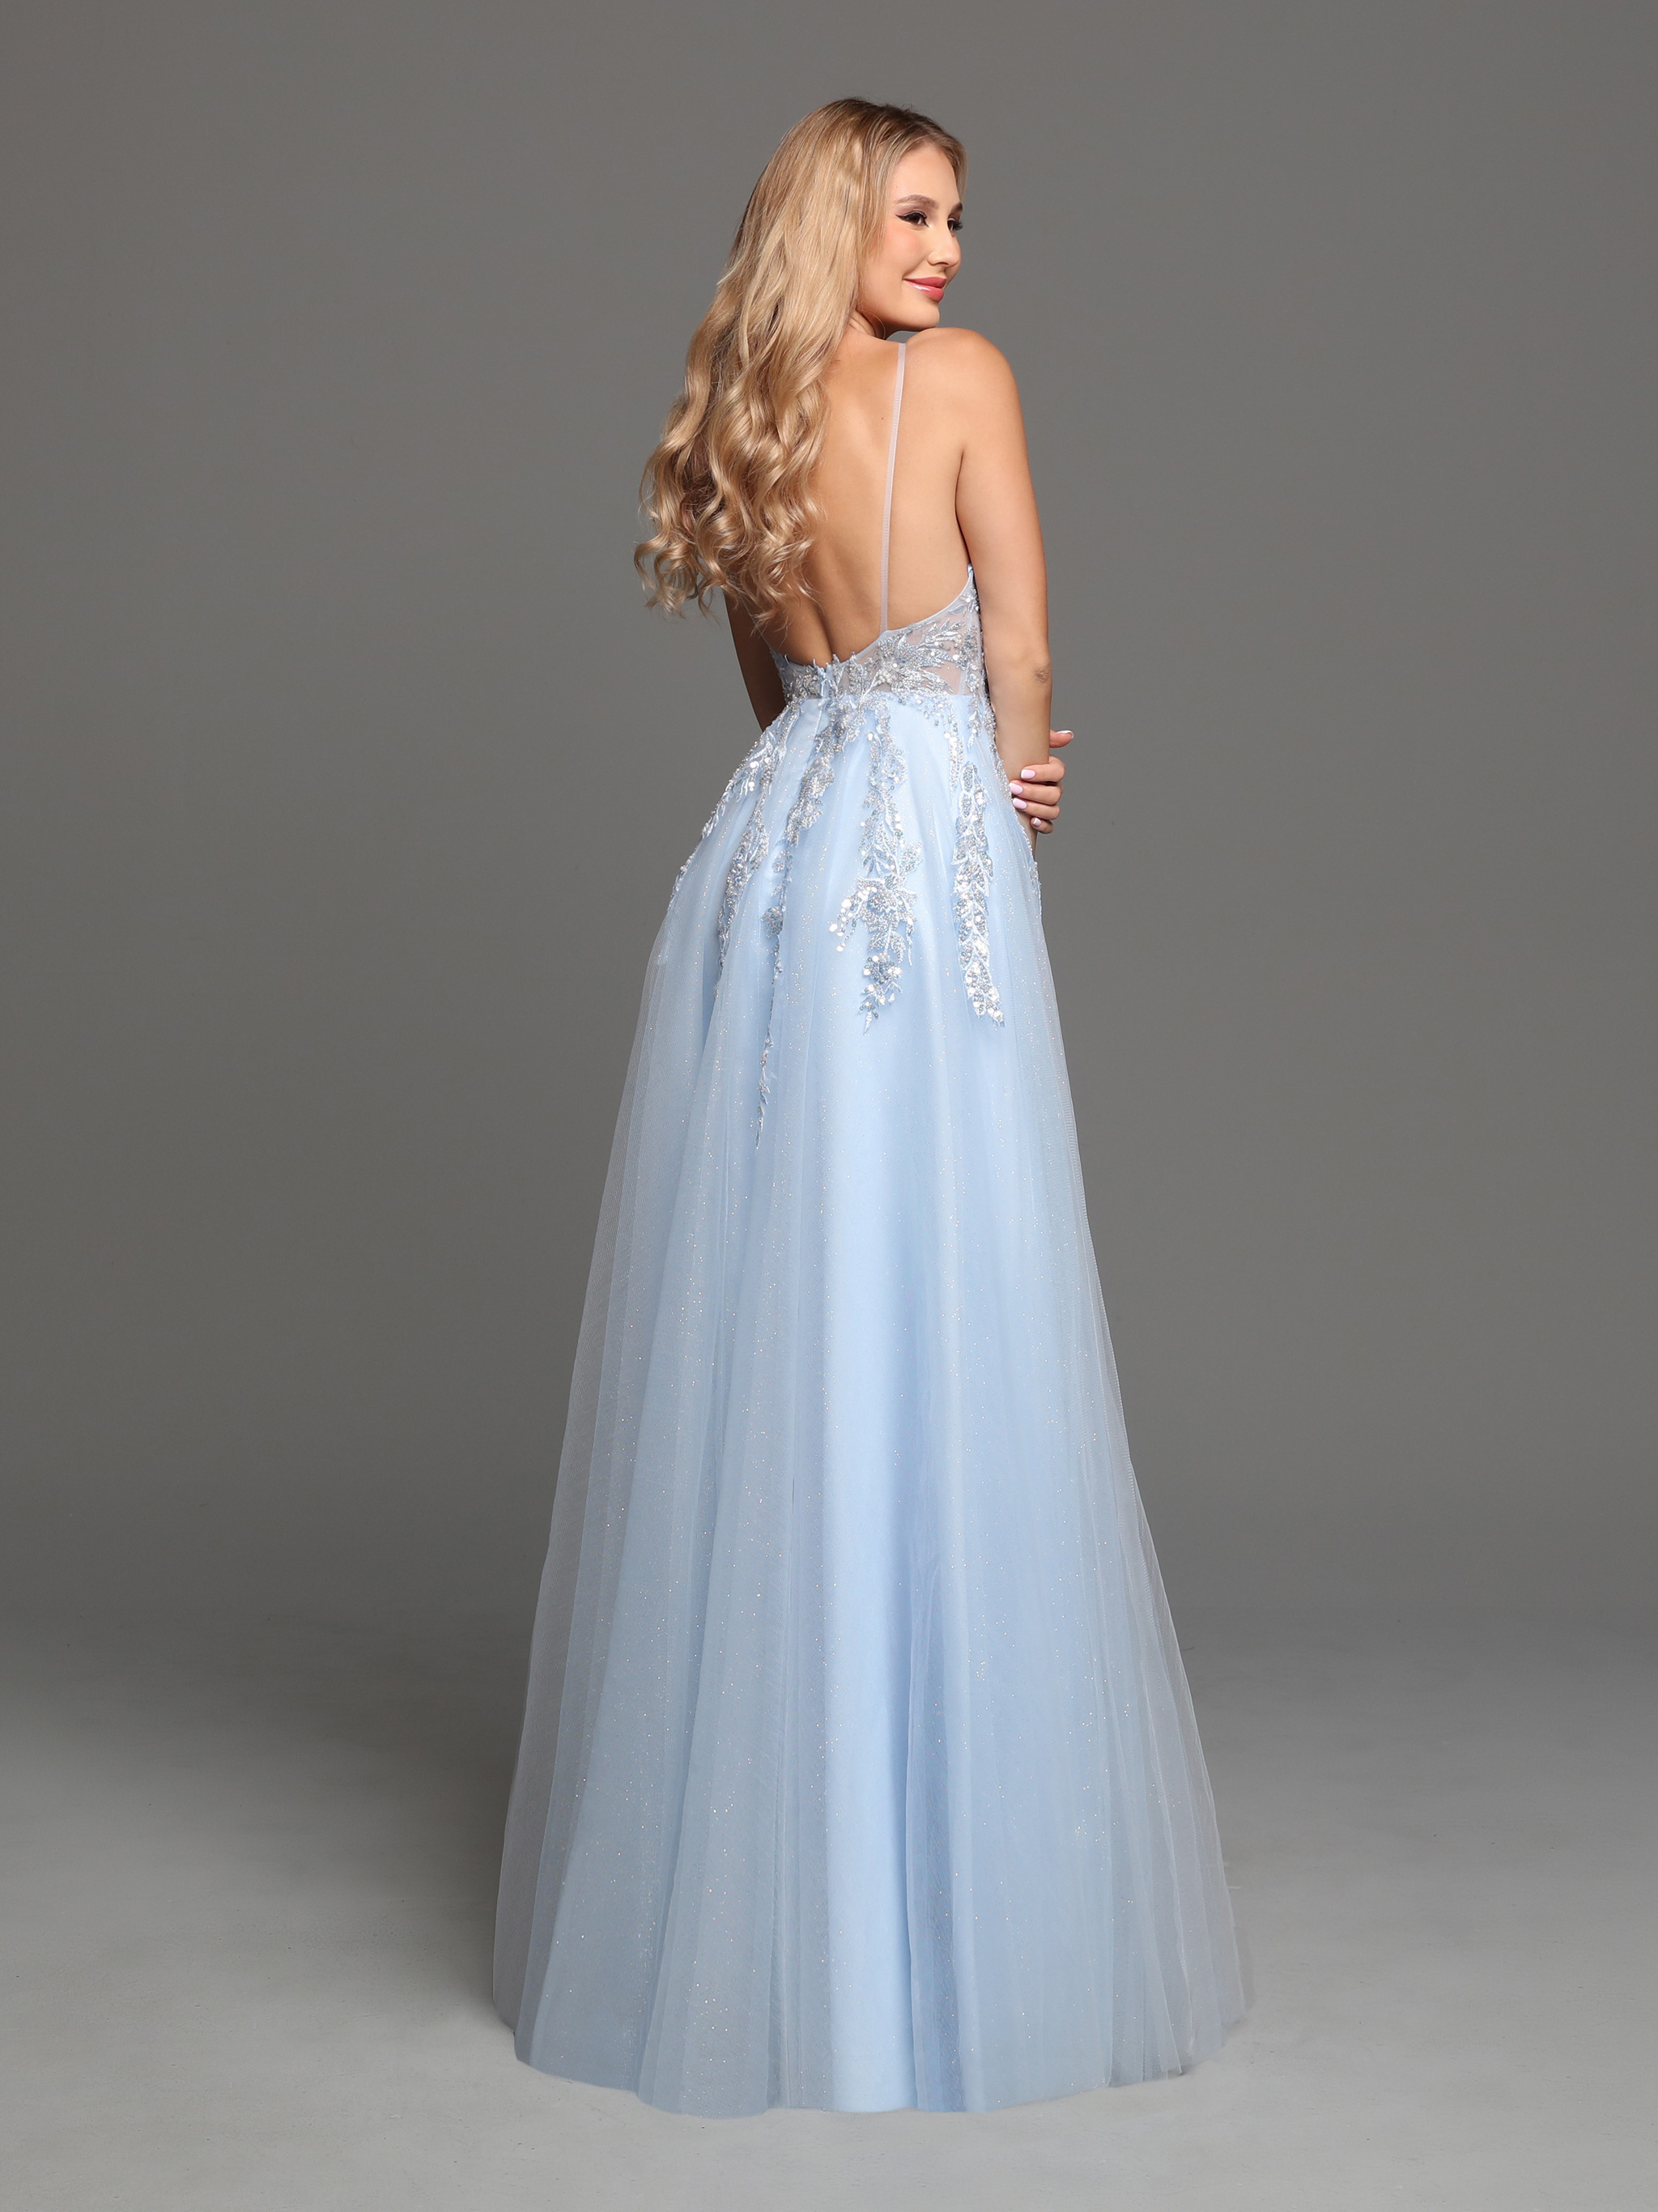 Back view of Style : 72279